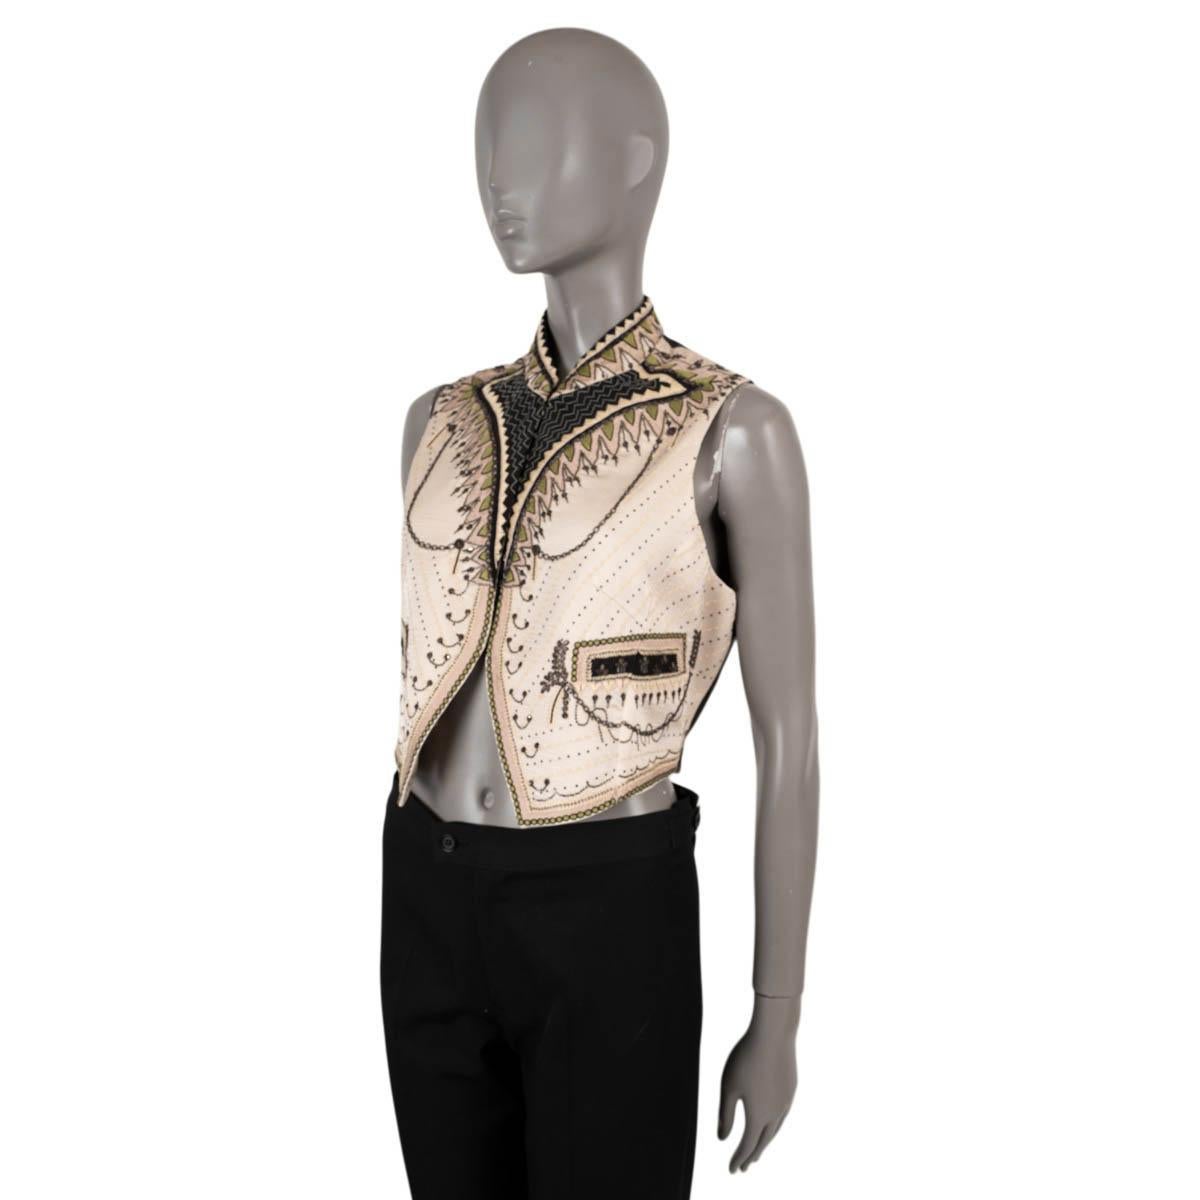 100% authentic Etro Lindsay cropped vest in cream and black silk (100%) with embroidery in black, pink, green. Features a mock neck and sequin and chain embellishments. Closes with concealed hooks on the front and is lined in viscose (100%). Has